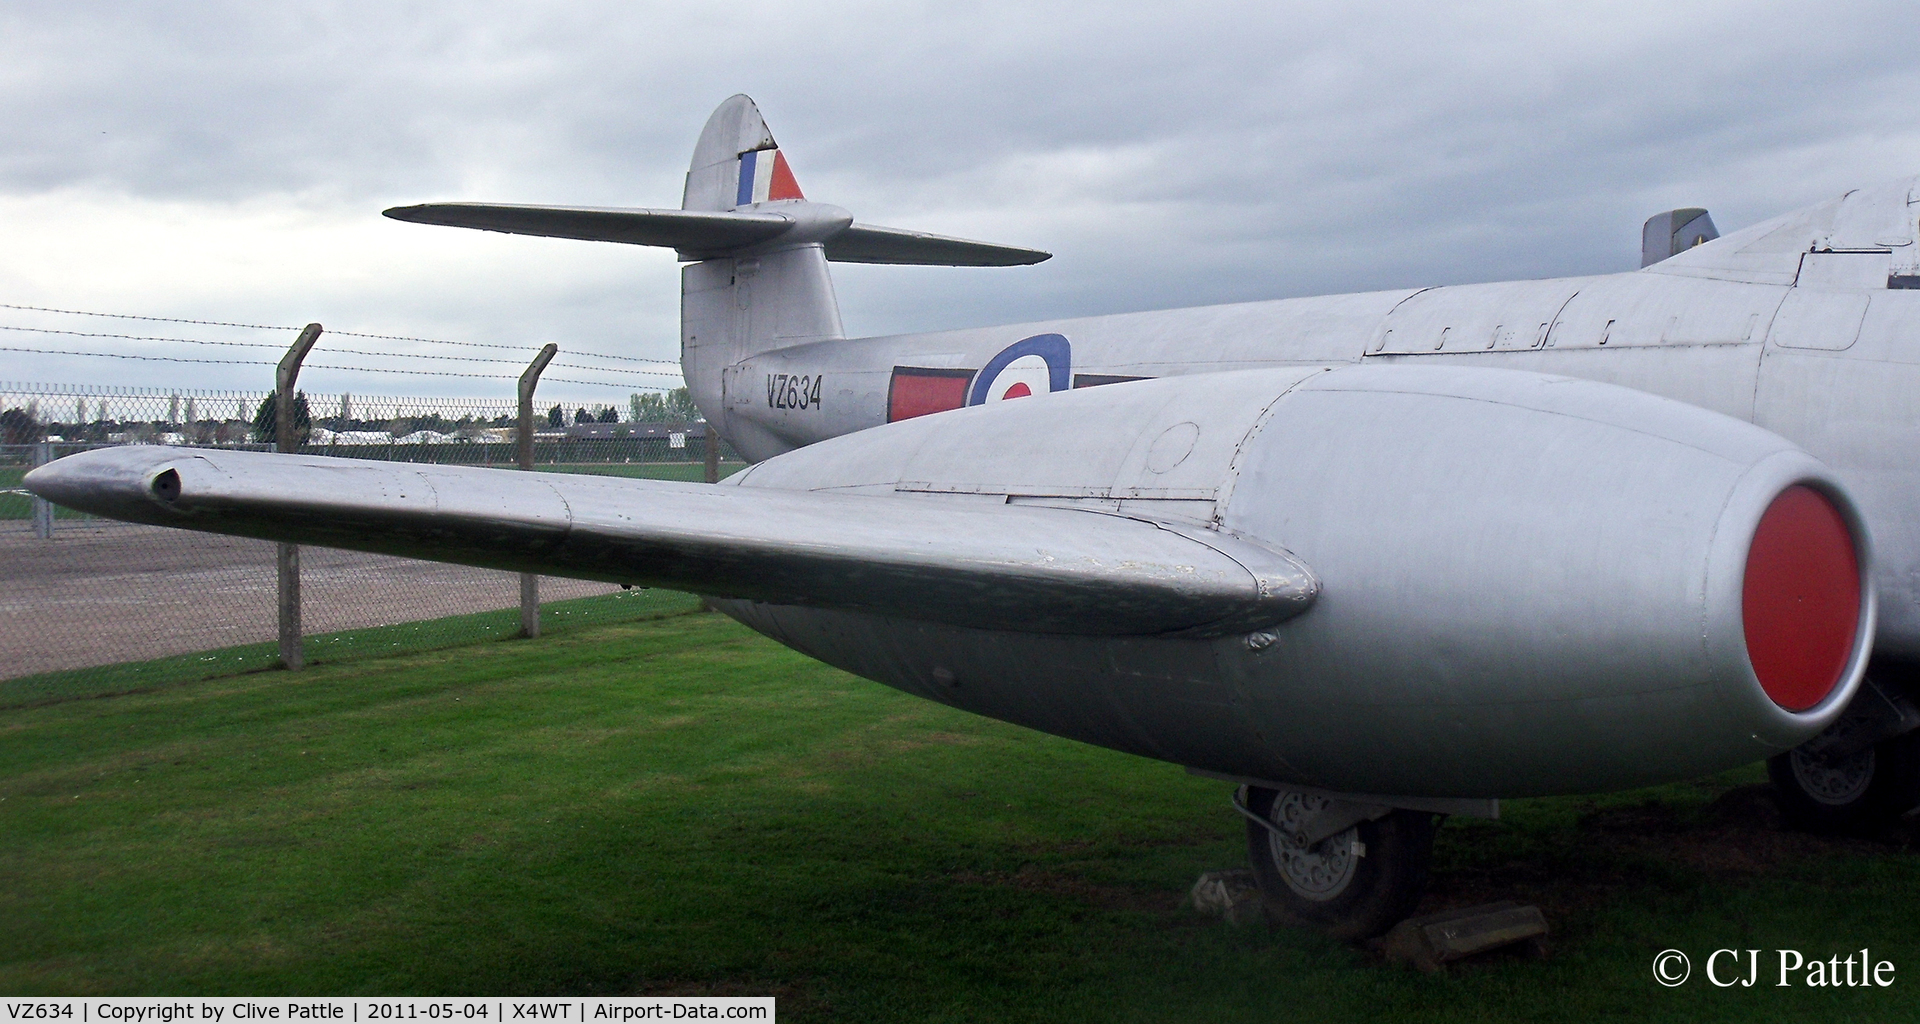 VZ634, Gloster Meteor T.7 C/N Not found VZ634, Preserved at the Newark Air Museum, Winthorpe, Nottinghamshire. X4WT